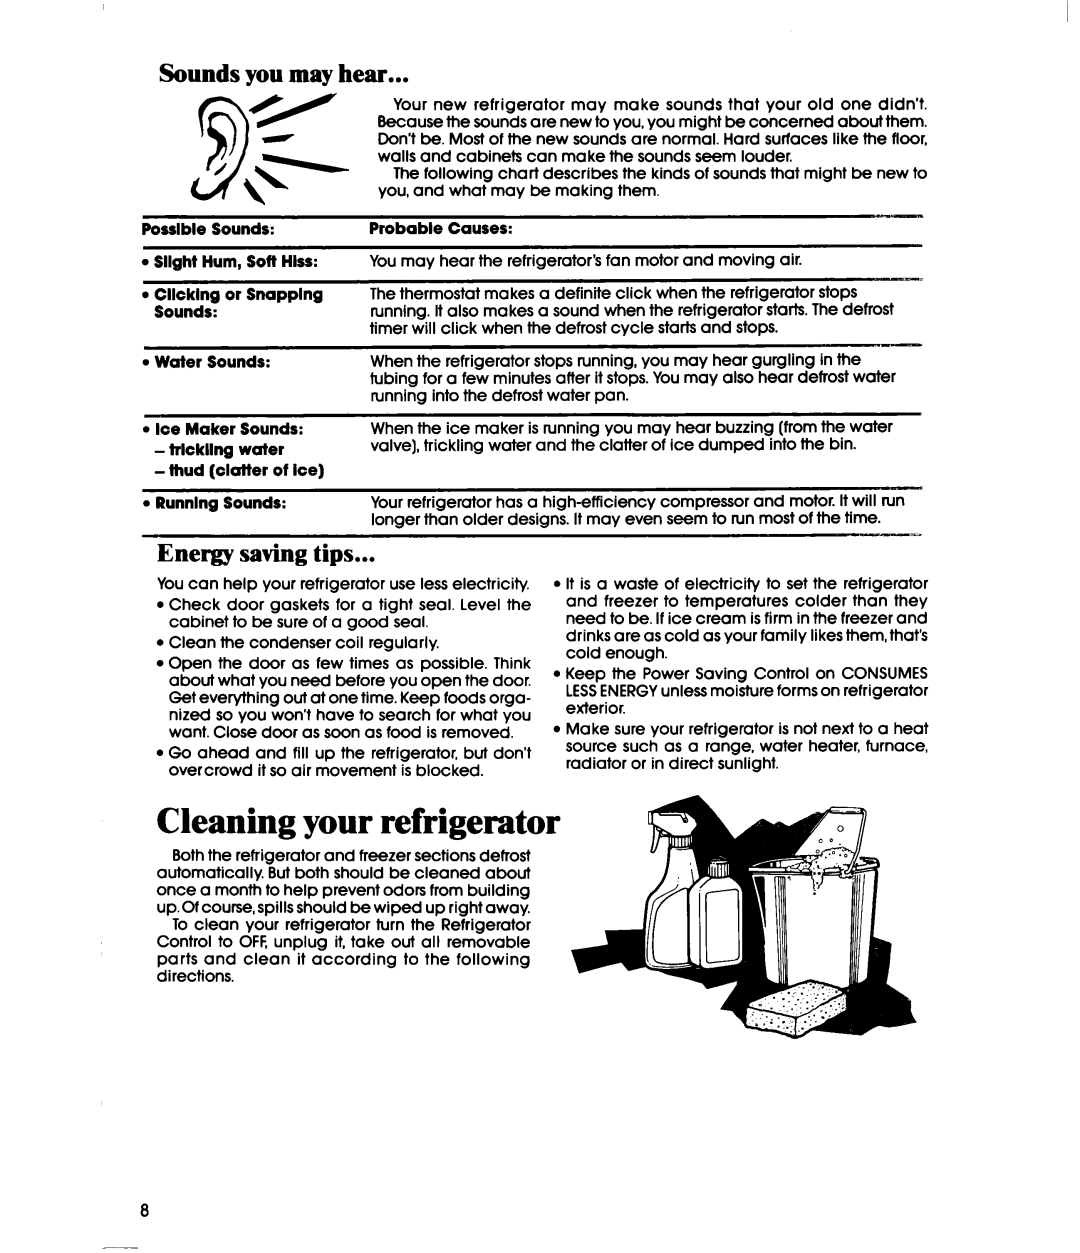 Whirlpool ET18XM manual Cleaning your refrigerator, Sounds you may hear, Energy saving tips 